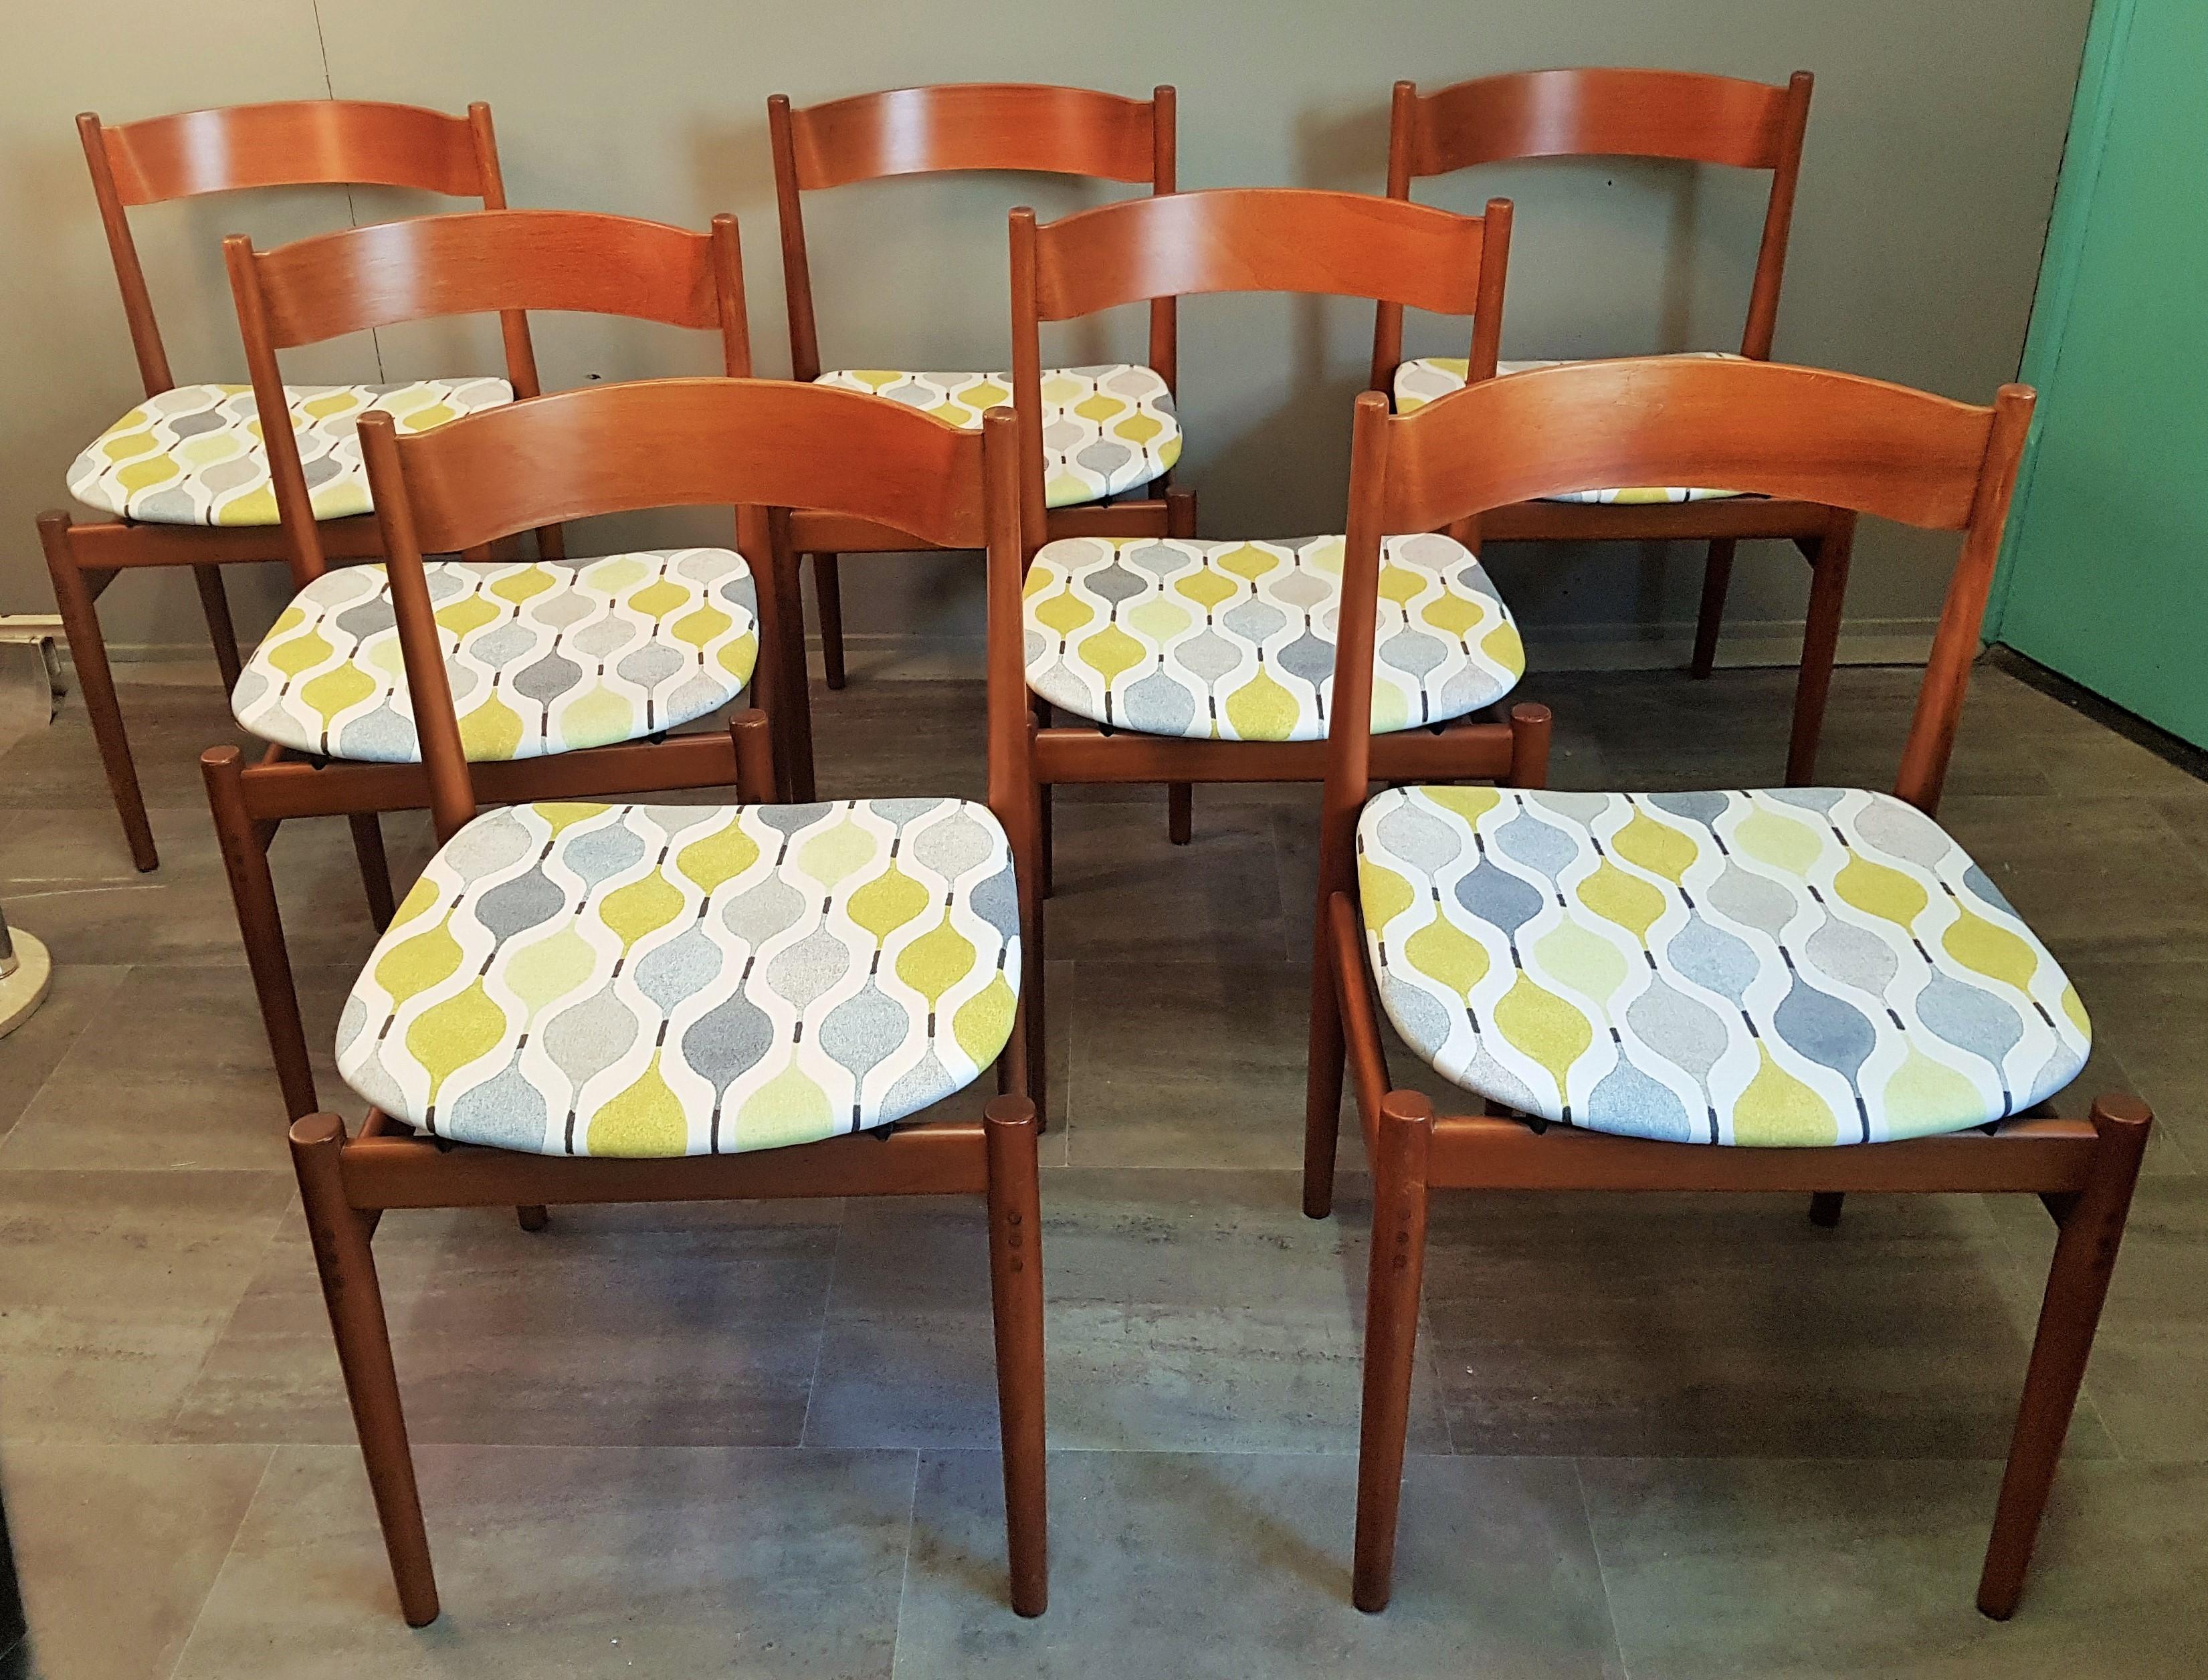 Midcentury set of 7 dining room chairs mod. 101 by Gianfranco Frattini for Cassina, Italy, 1960.

Signed.

Teak wood. Solid and stable. 

Fully restored.